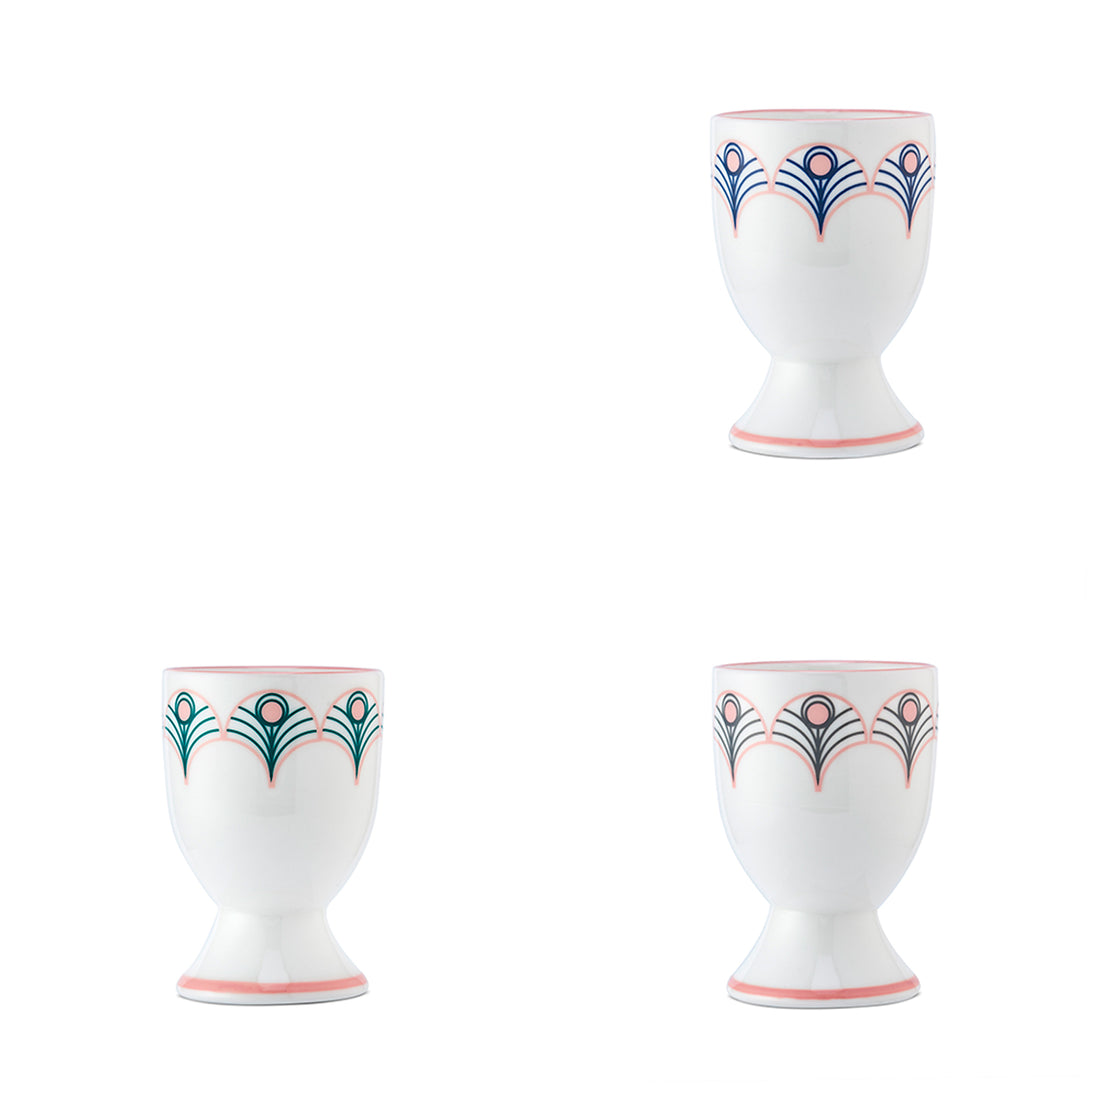 Peacock Egg Cup in Grey & Blush Pink